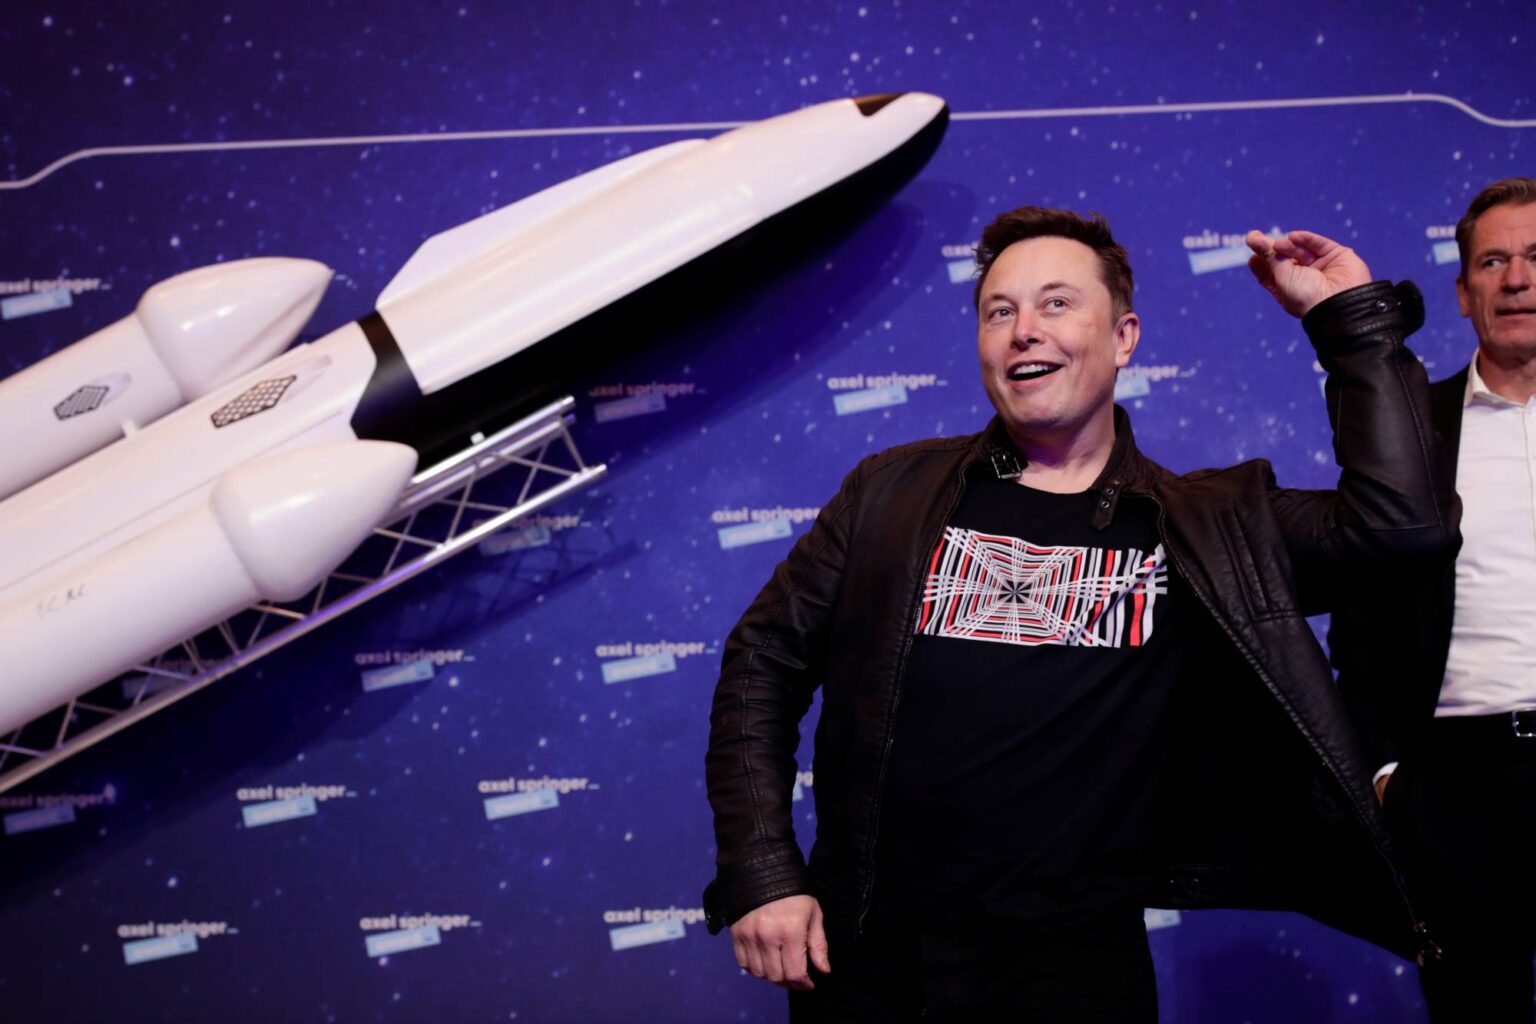 Elon Musk will host the May 8th episode of 'Saturday Night Live', alongside musical guest Miley Cyrus. How does Twitter feel? Read the best tweets here.